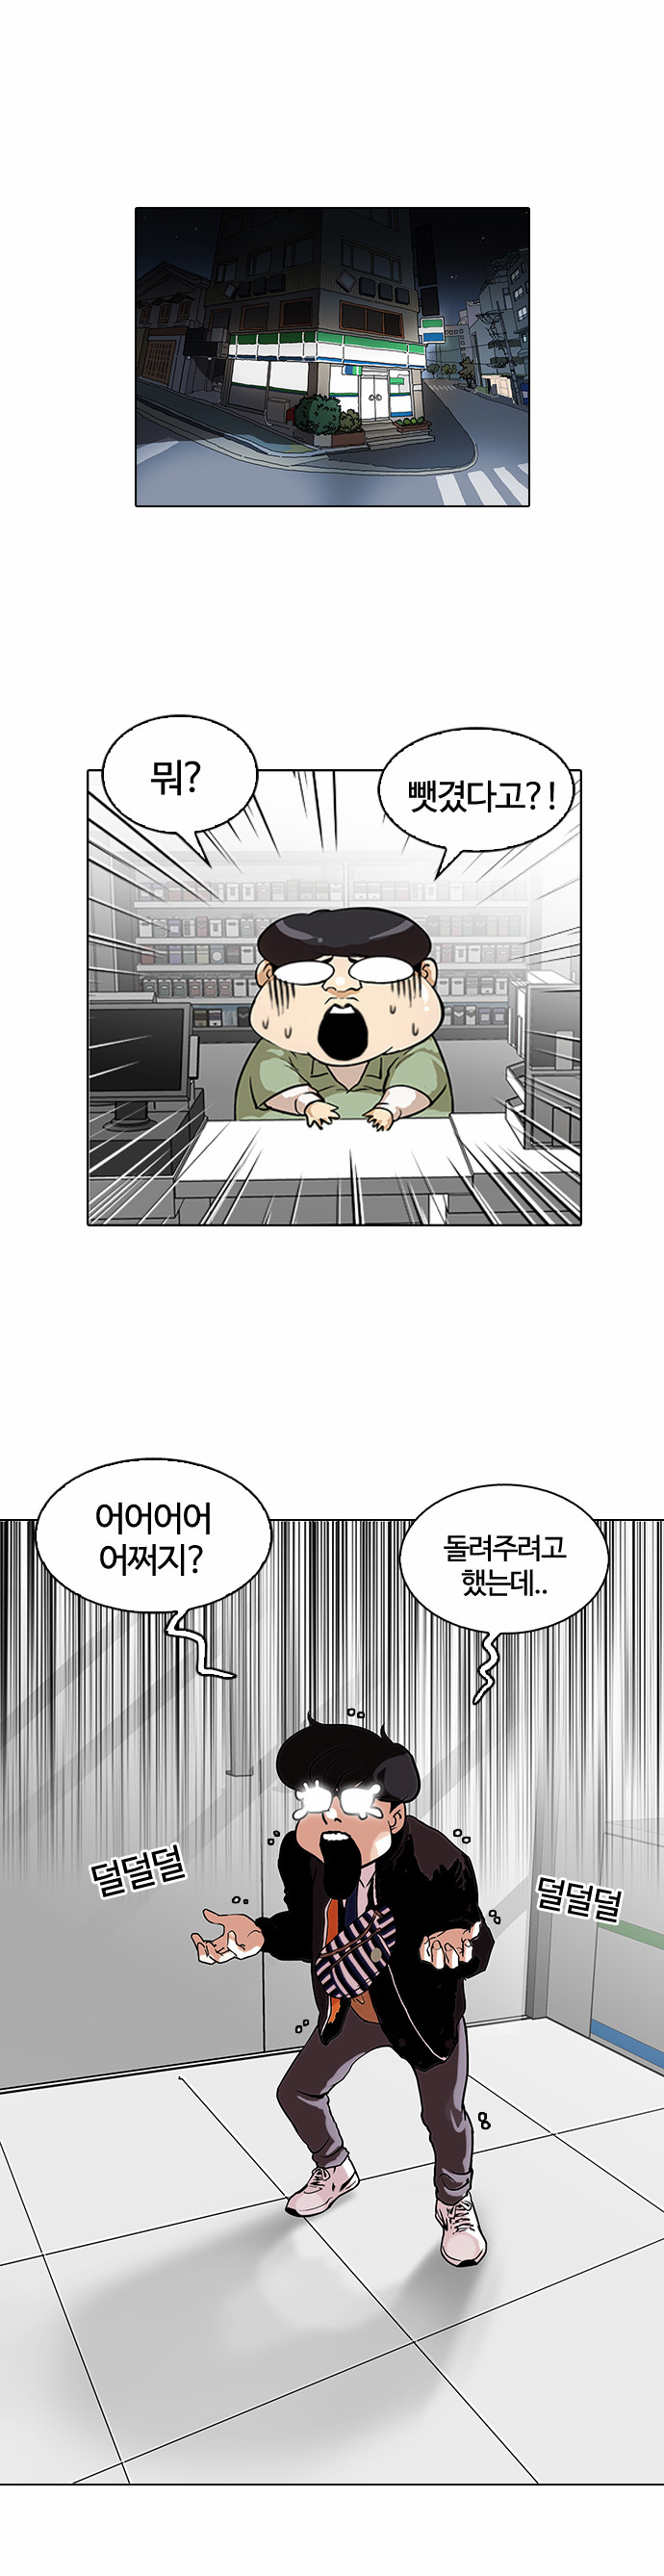 Lookism - Chapter 111 - Page 5